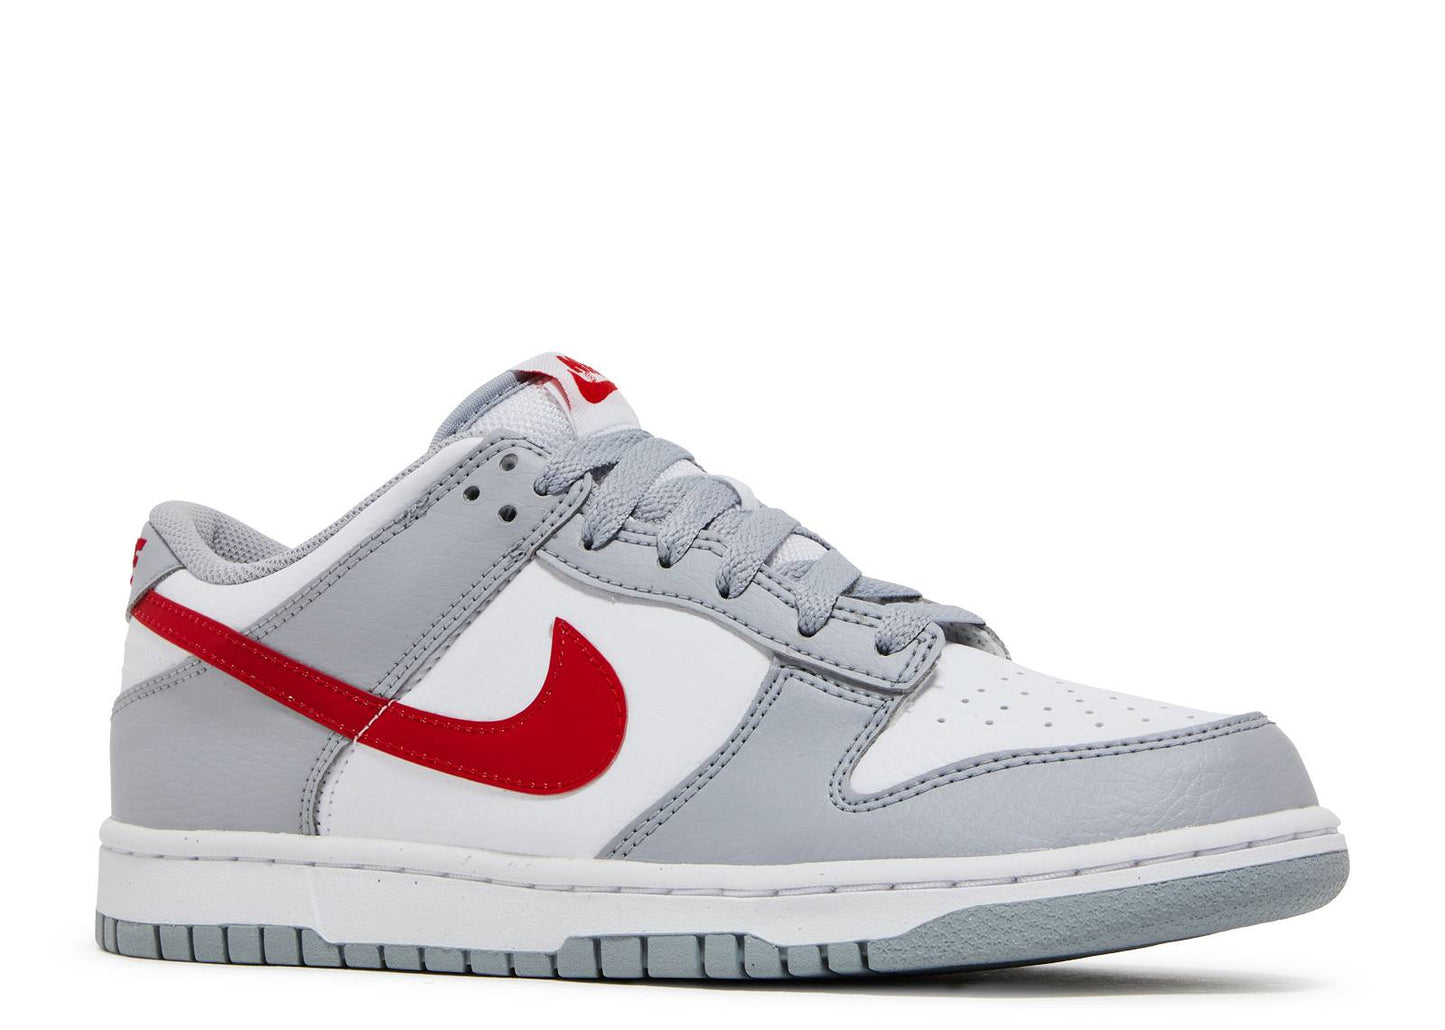 Nike Dunk Low GS "Grey/Red"